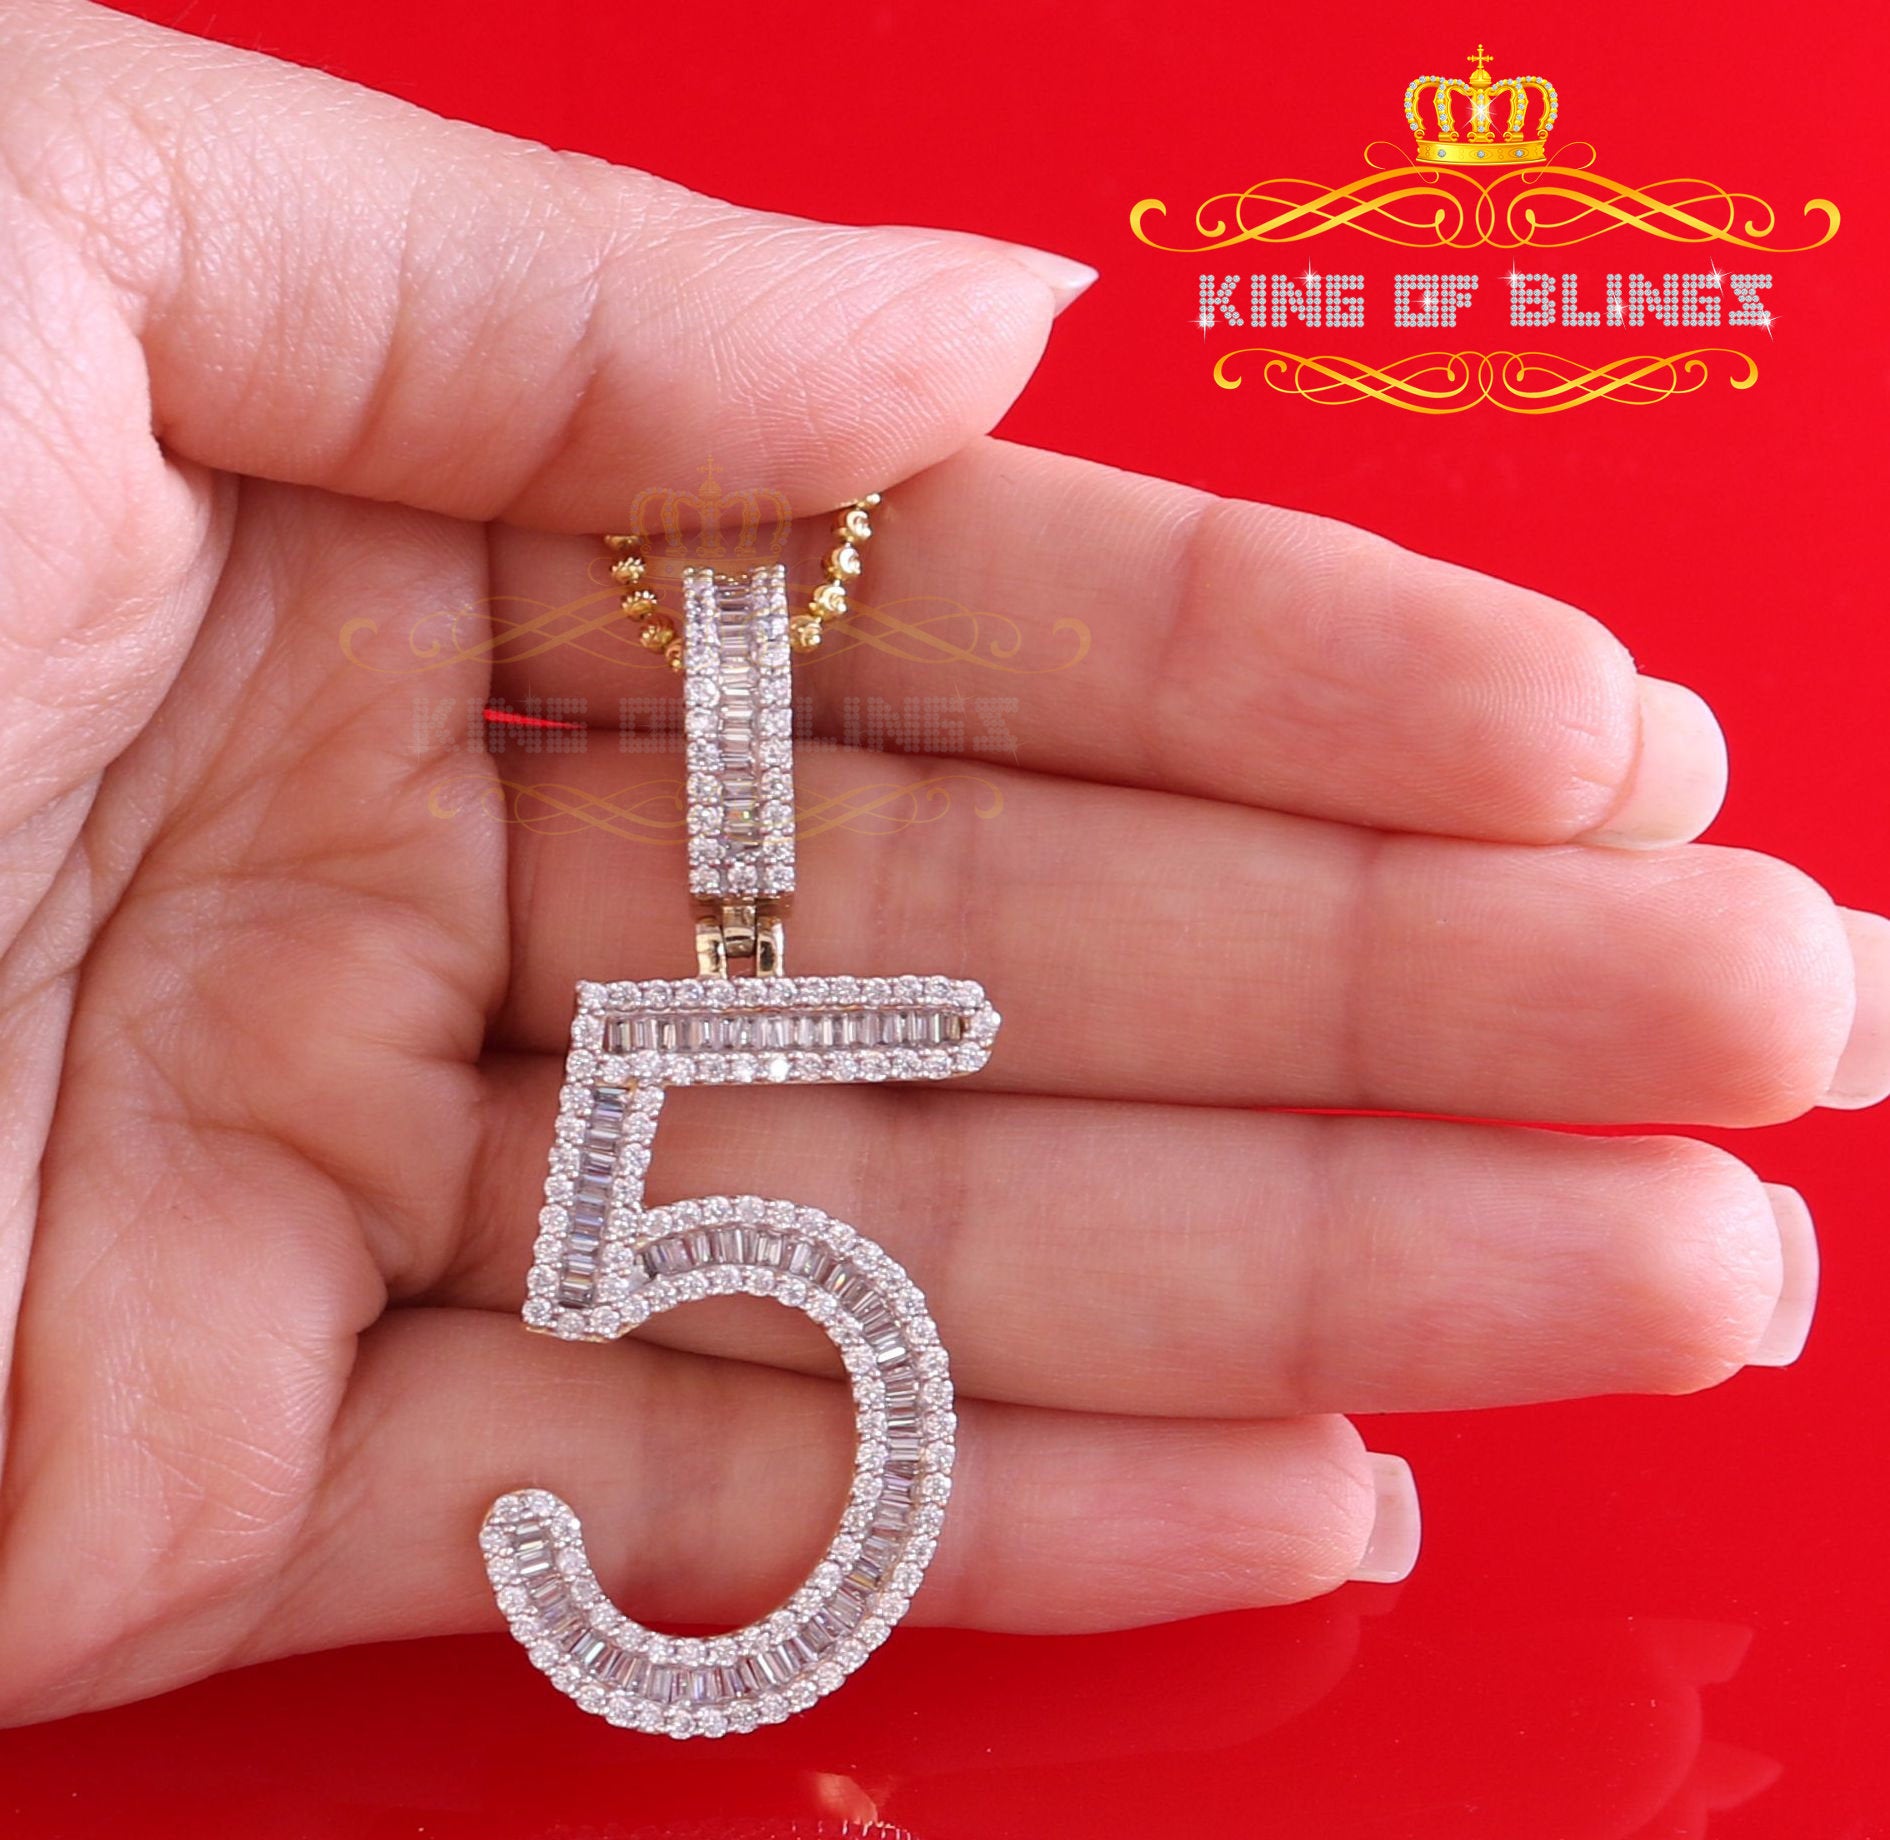 Yellow Sterling Silver Baguette Numeric Number '5' Pendant 4.78ct Cubic Zirconia KING OF BLINGS